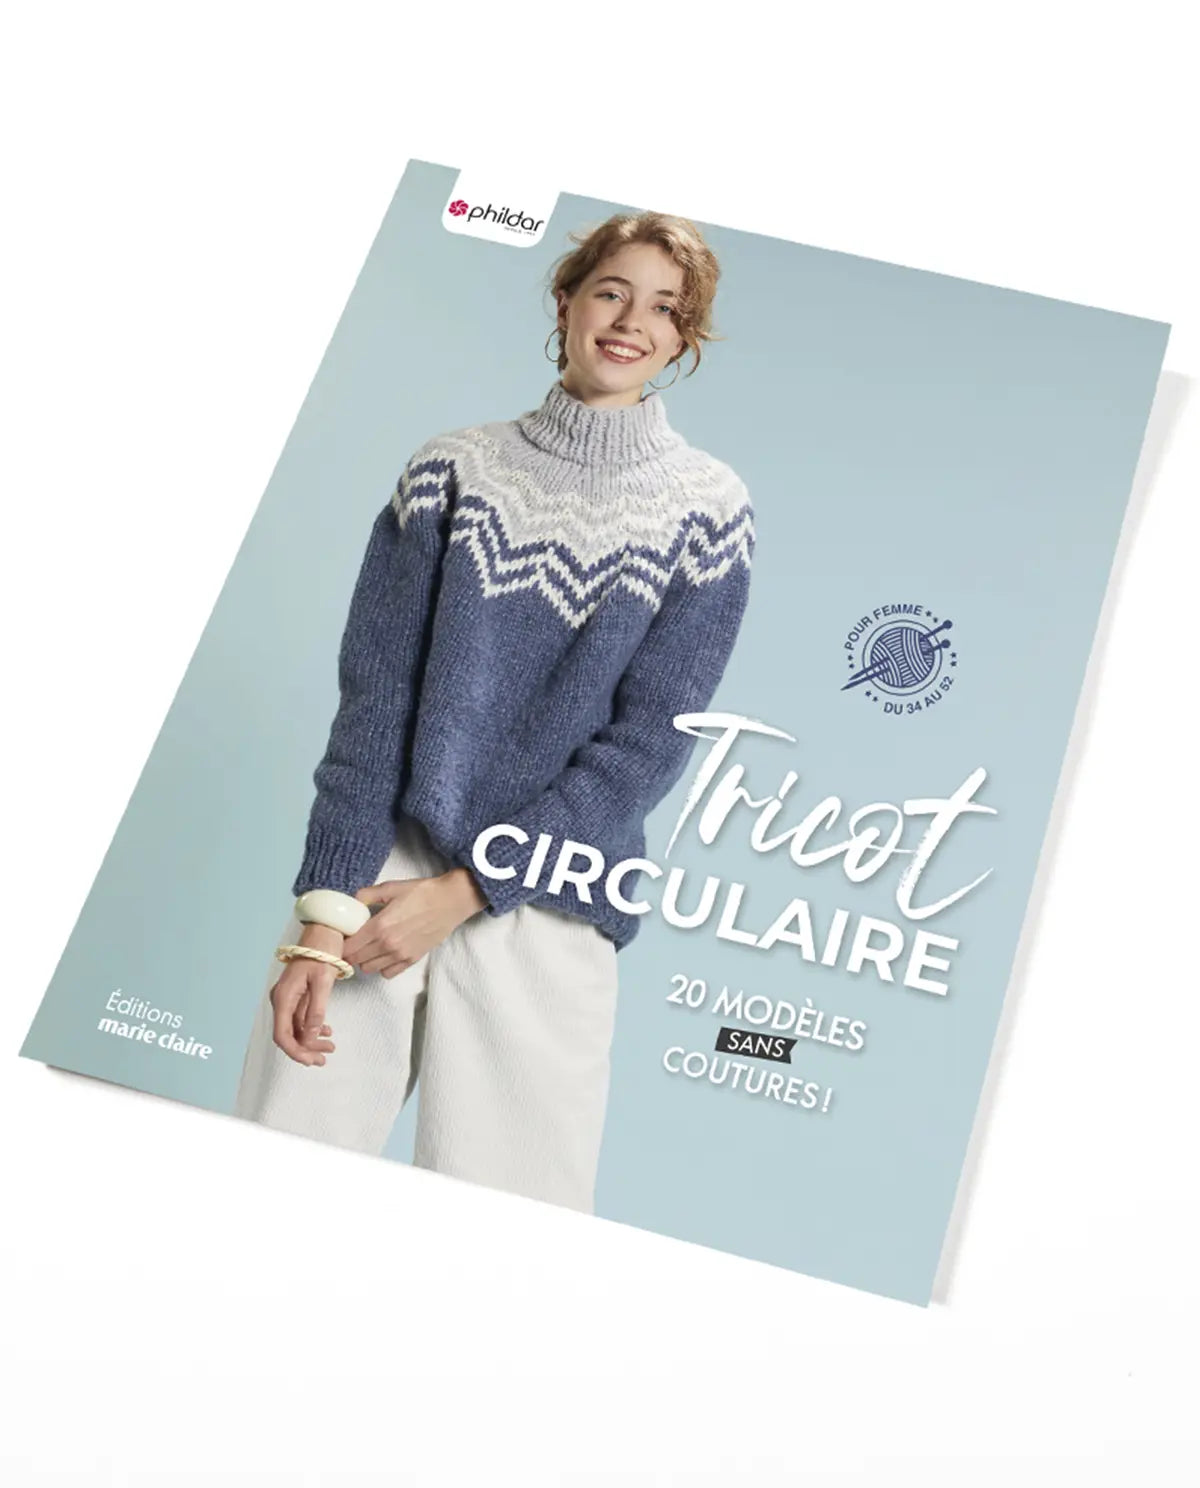 Tricot Circulaire